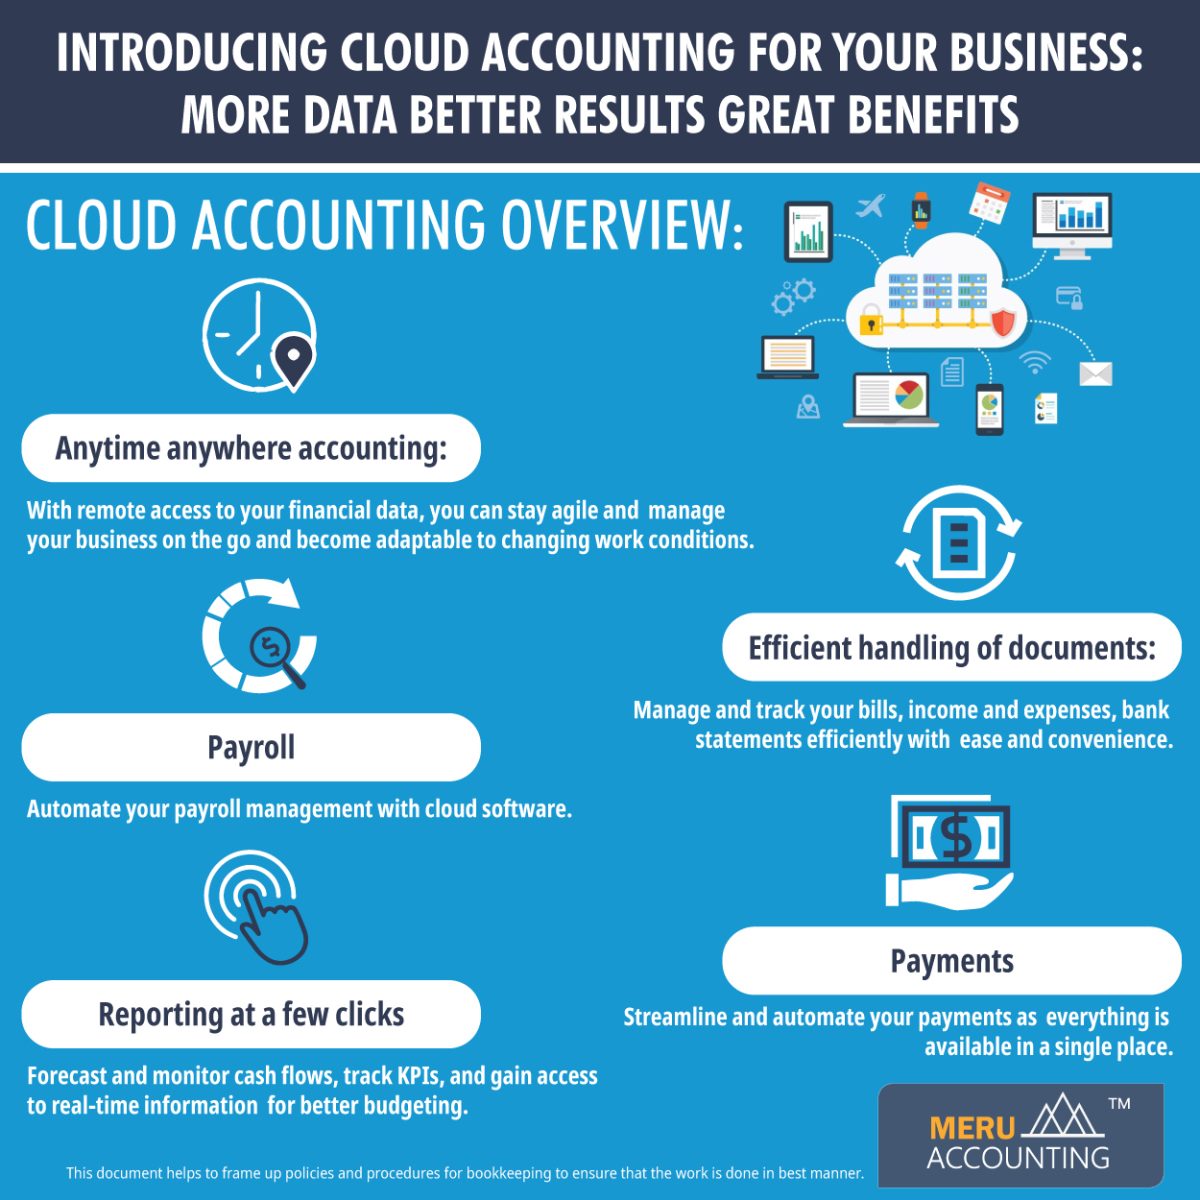 What is cloud accounting, and why does it matter?